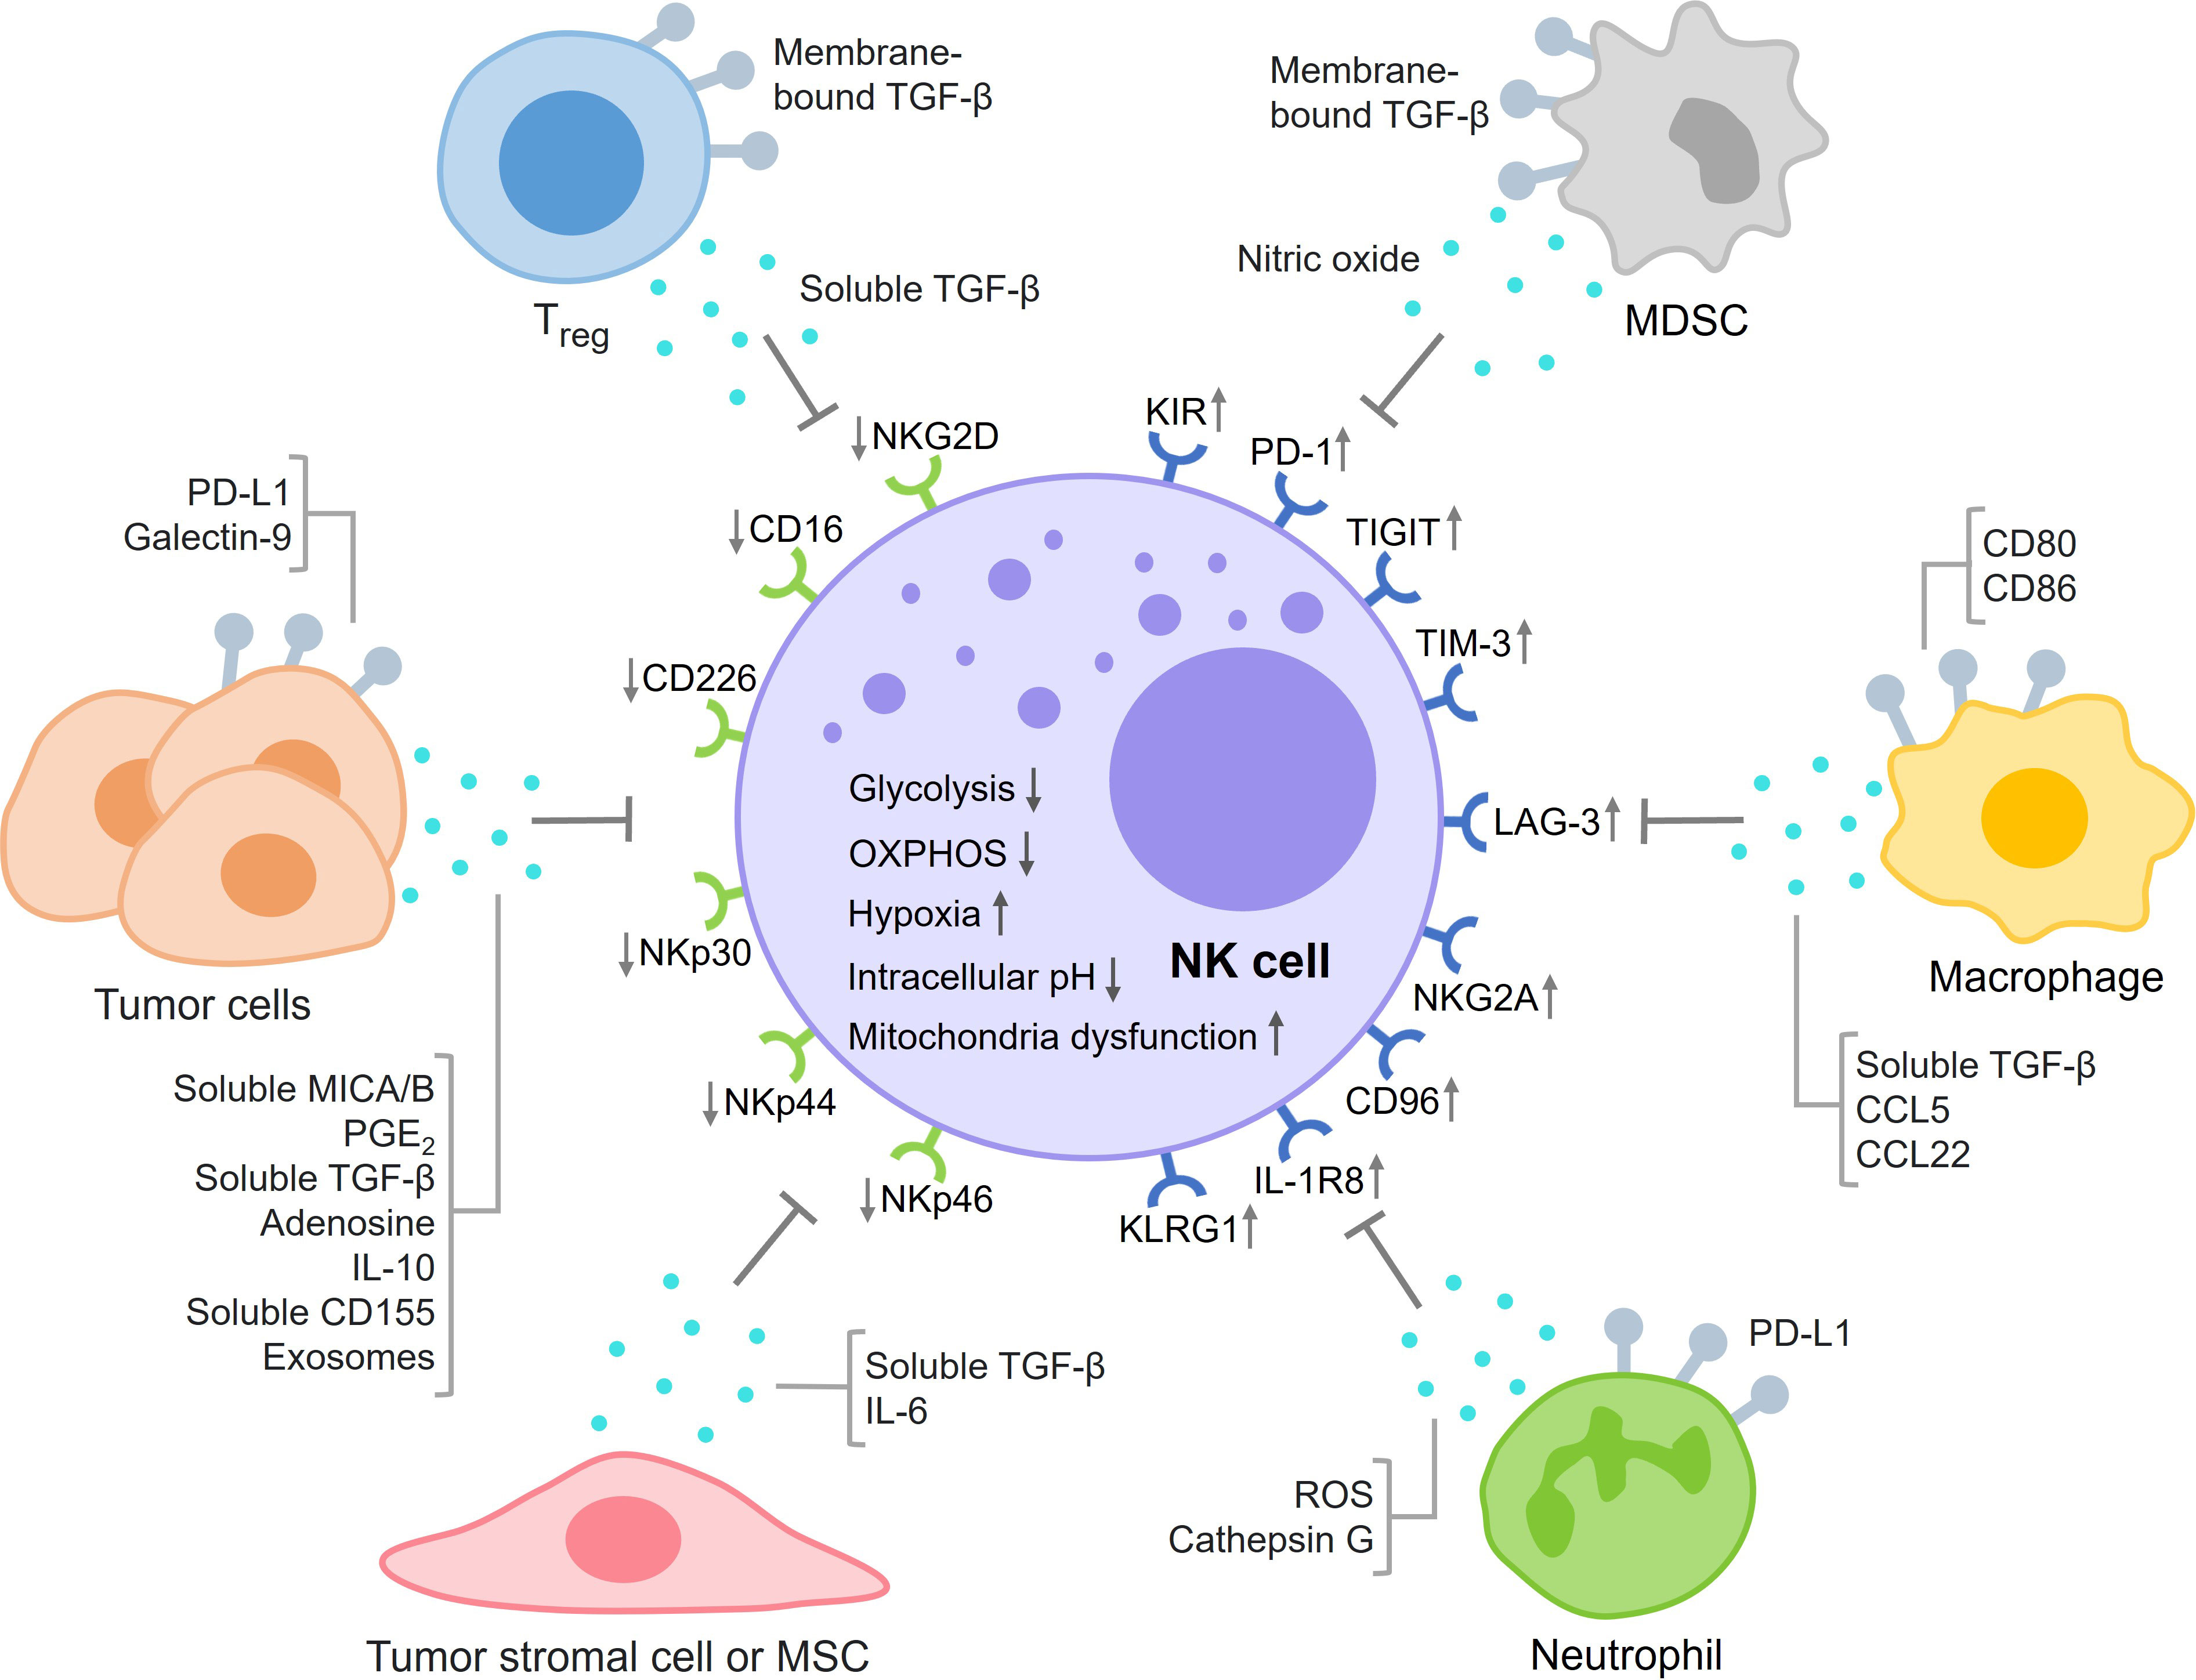 Frontiers | NK cell exhaustion in the tumor microenvironment